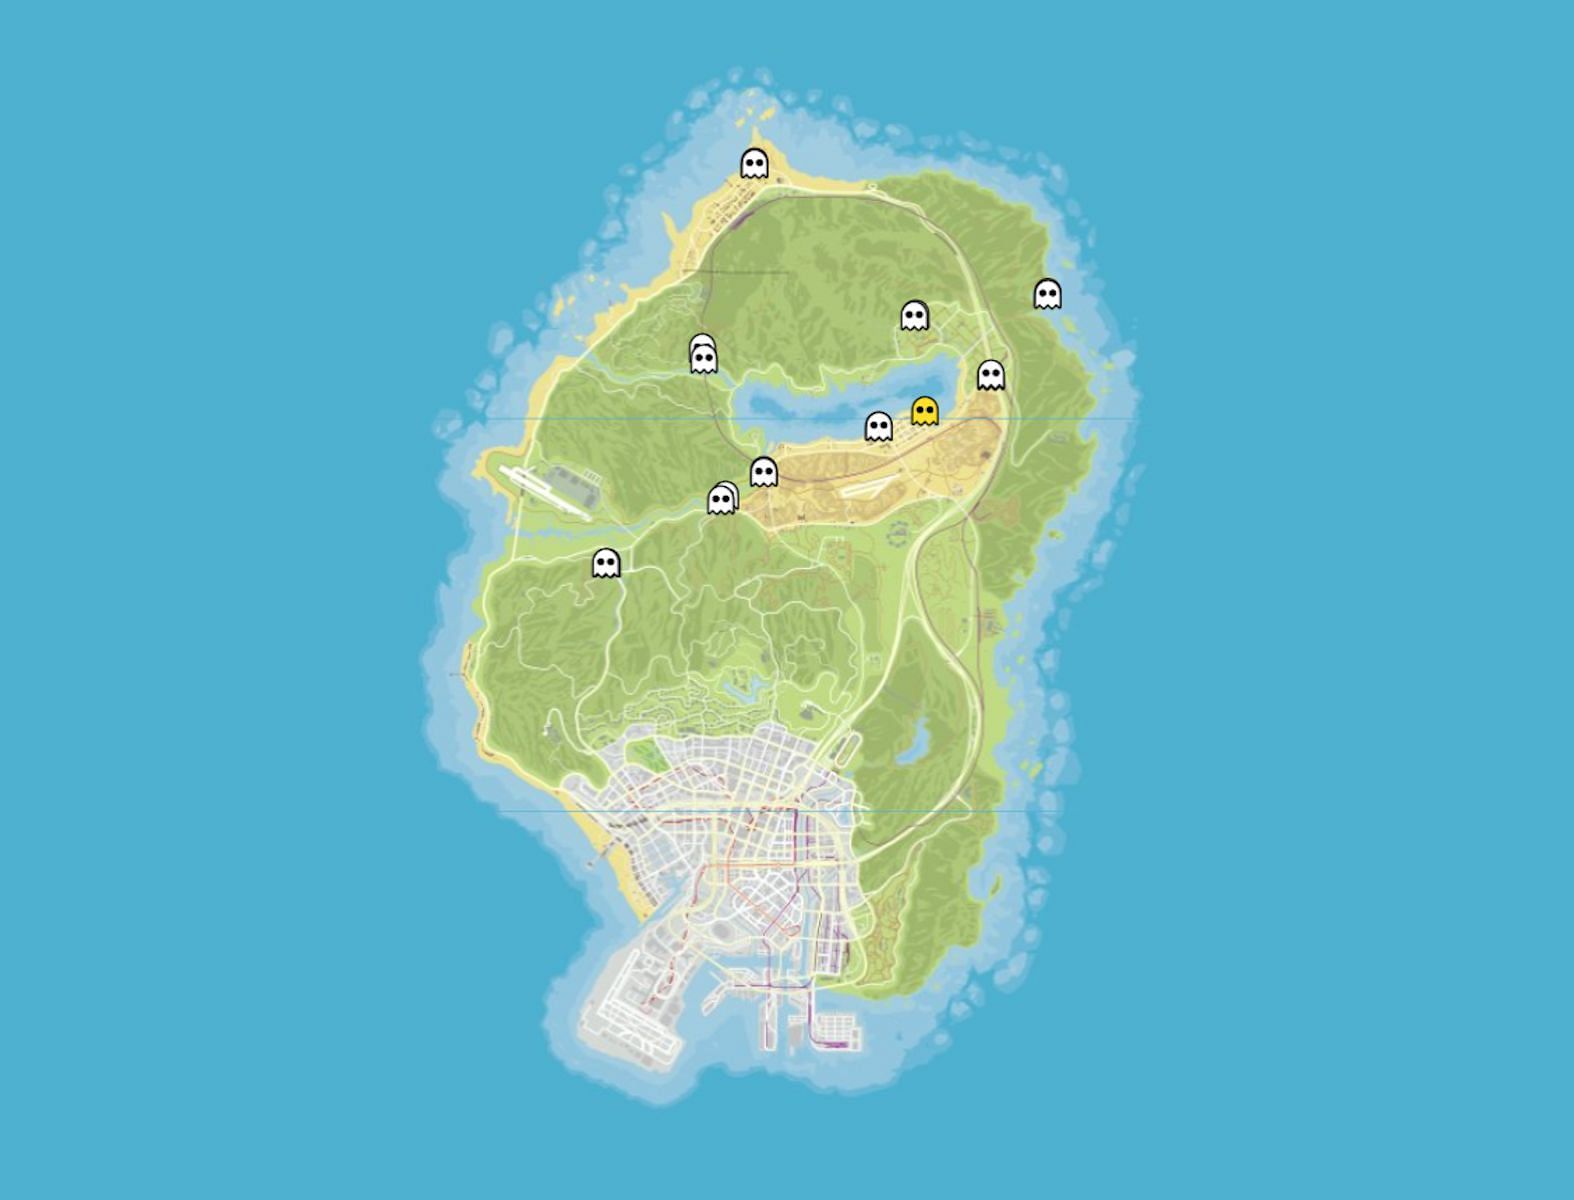 GTA Online Ghost locations guide for Ghost Exposed collectables -  RockstarINTEL